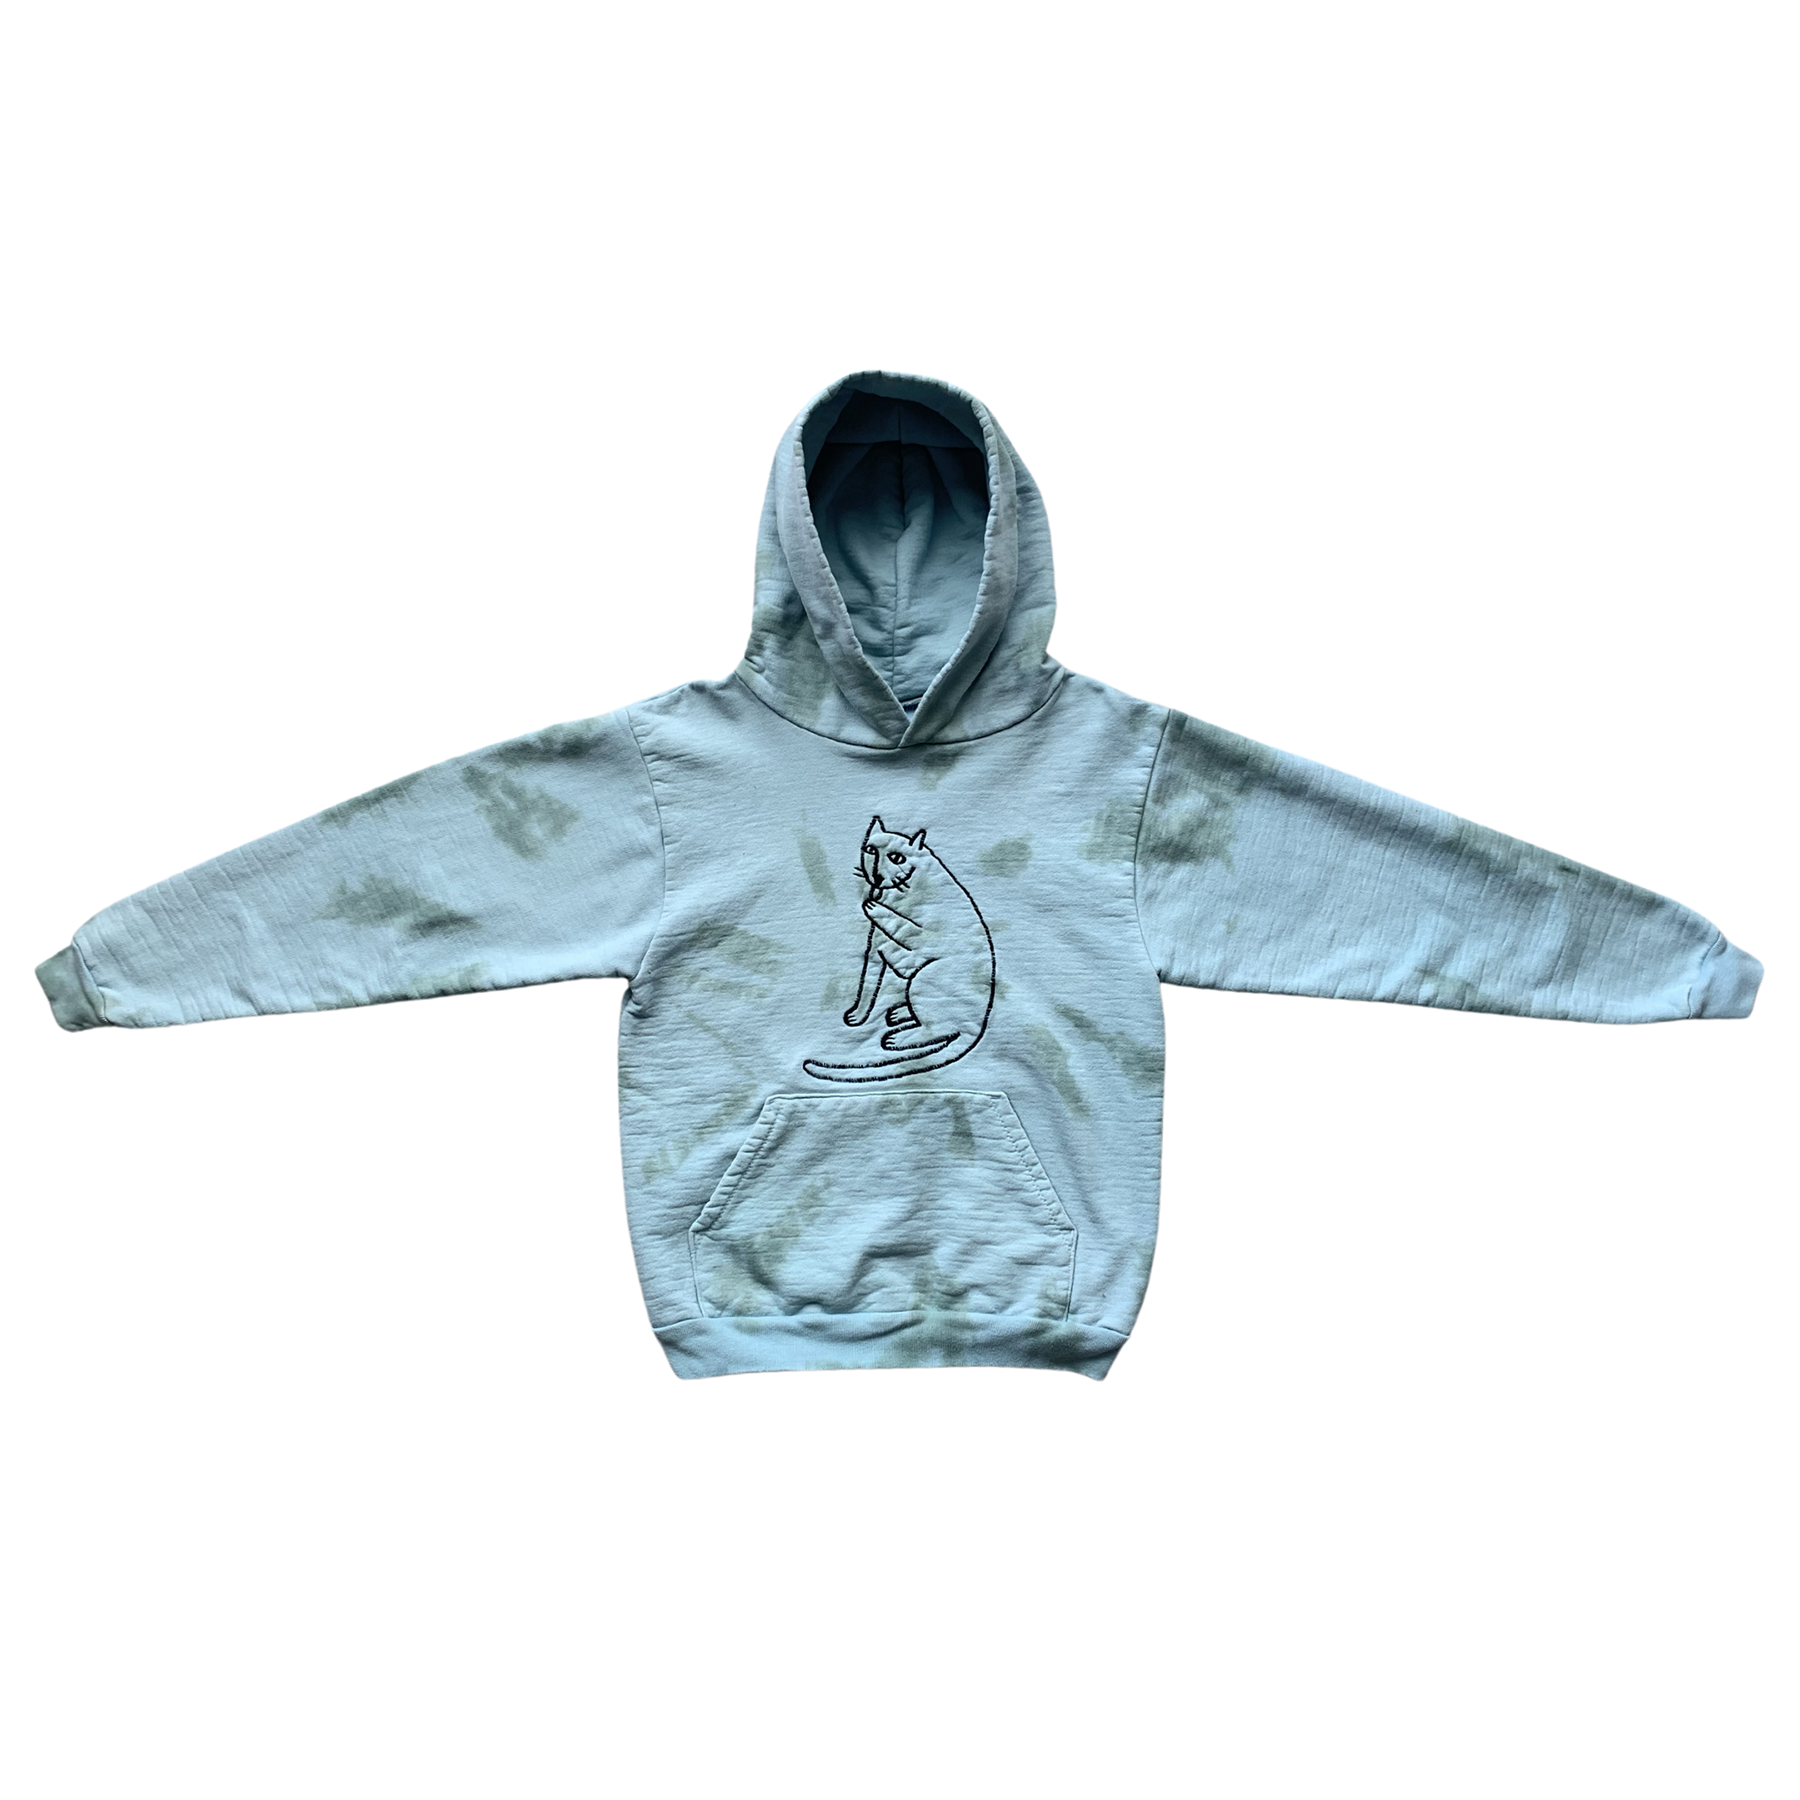 heavy fleece hoodie - organic usa cotton - embroidered and tie dyed - S